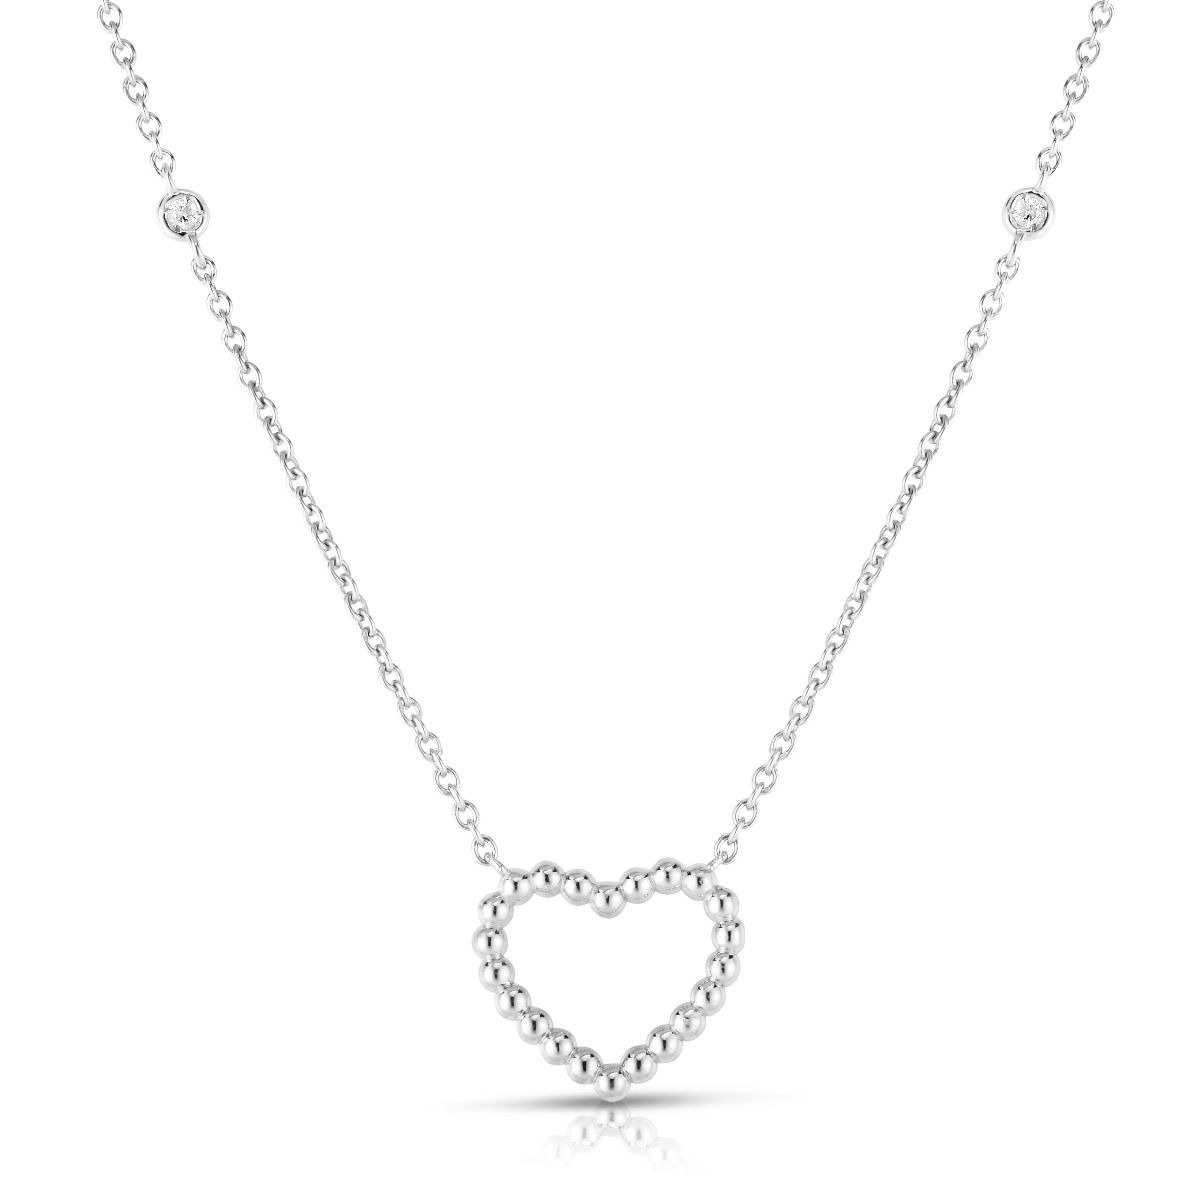 White Gold Beaded Heart Necklace